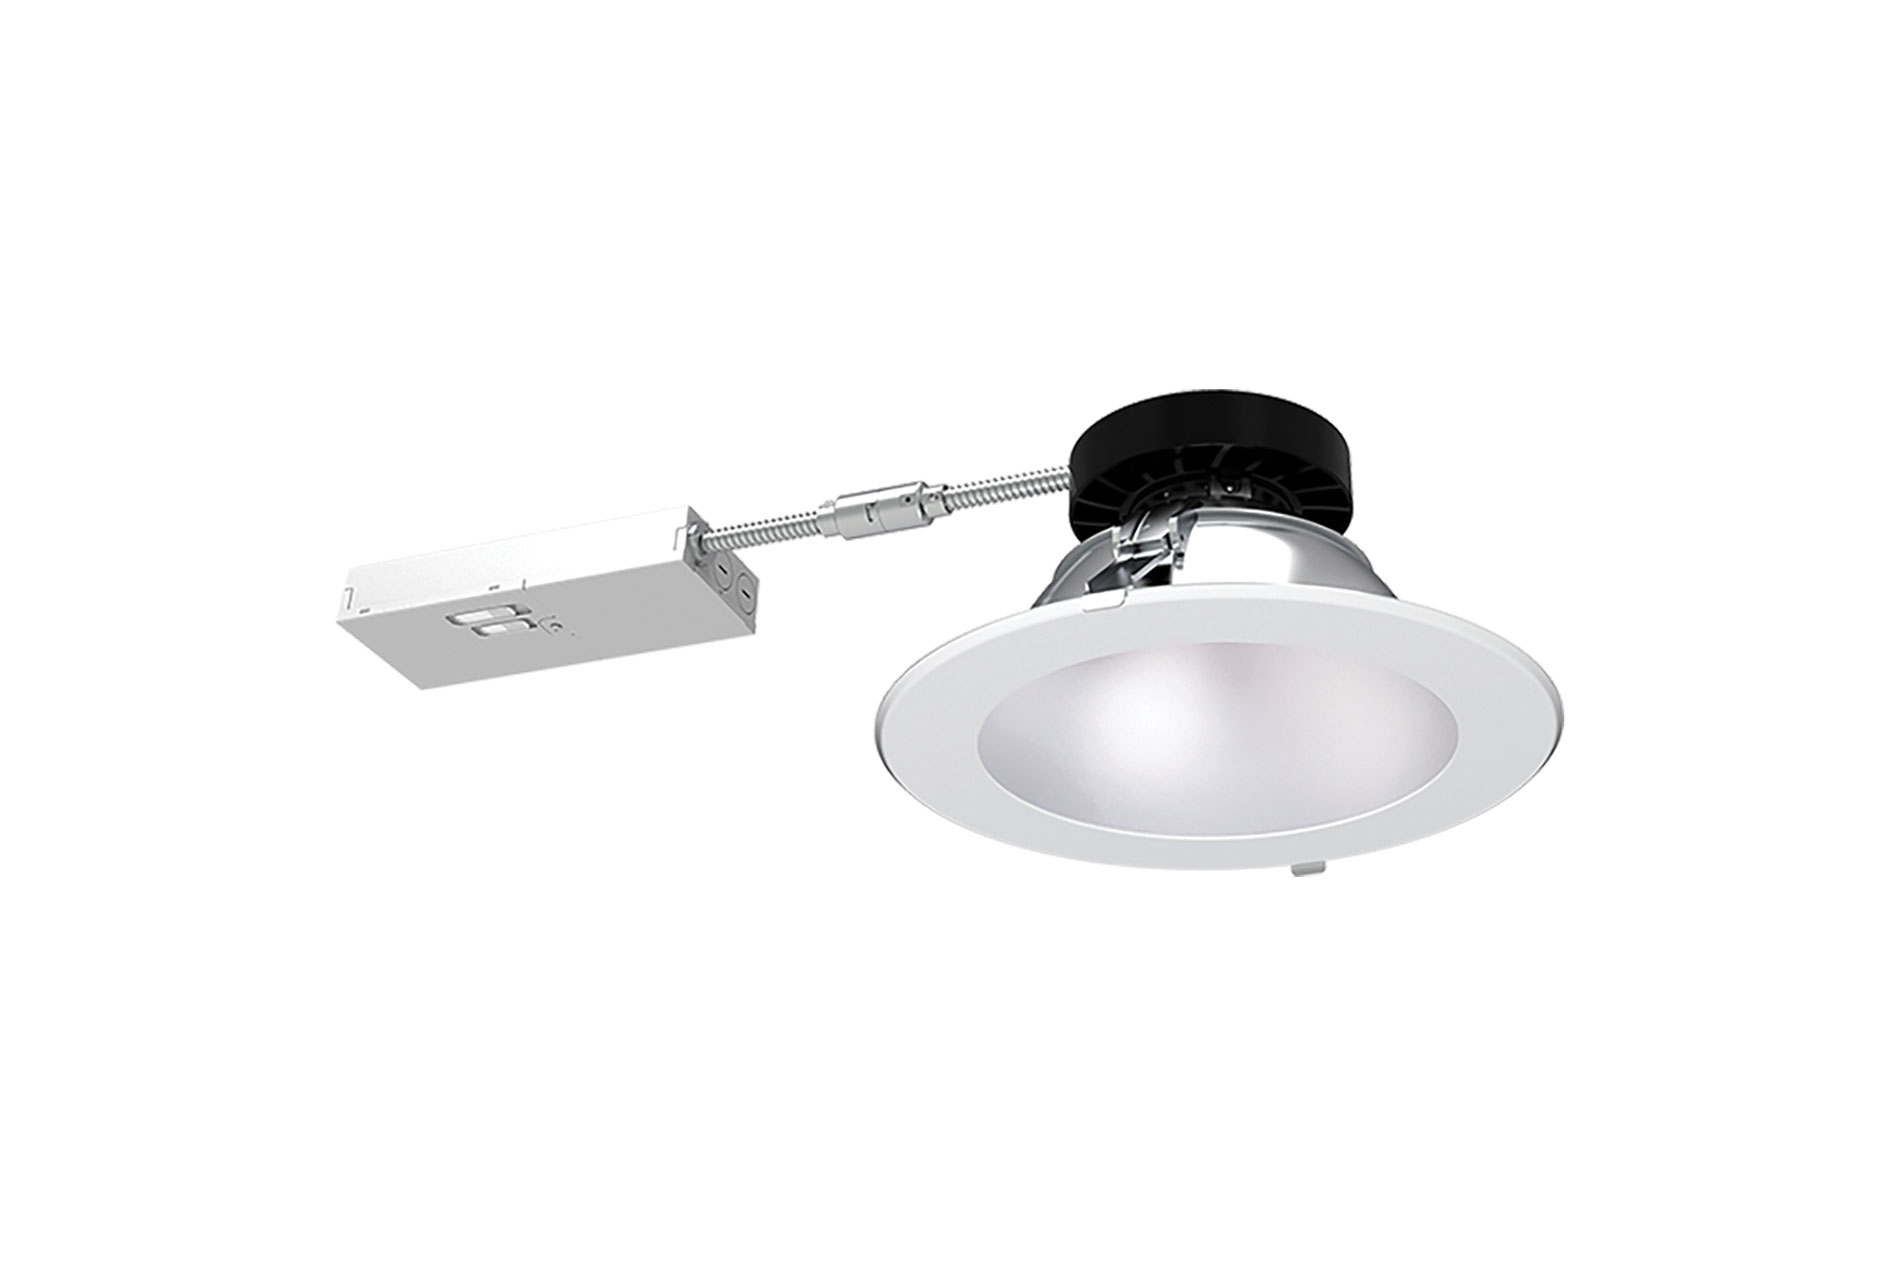 Black and silver downlight. Image by SLG Lighting.